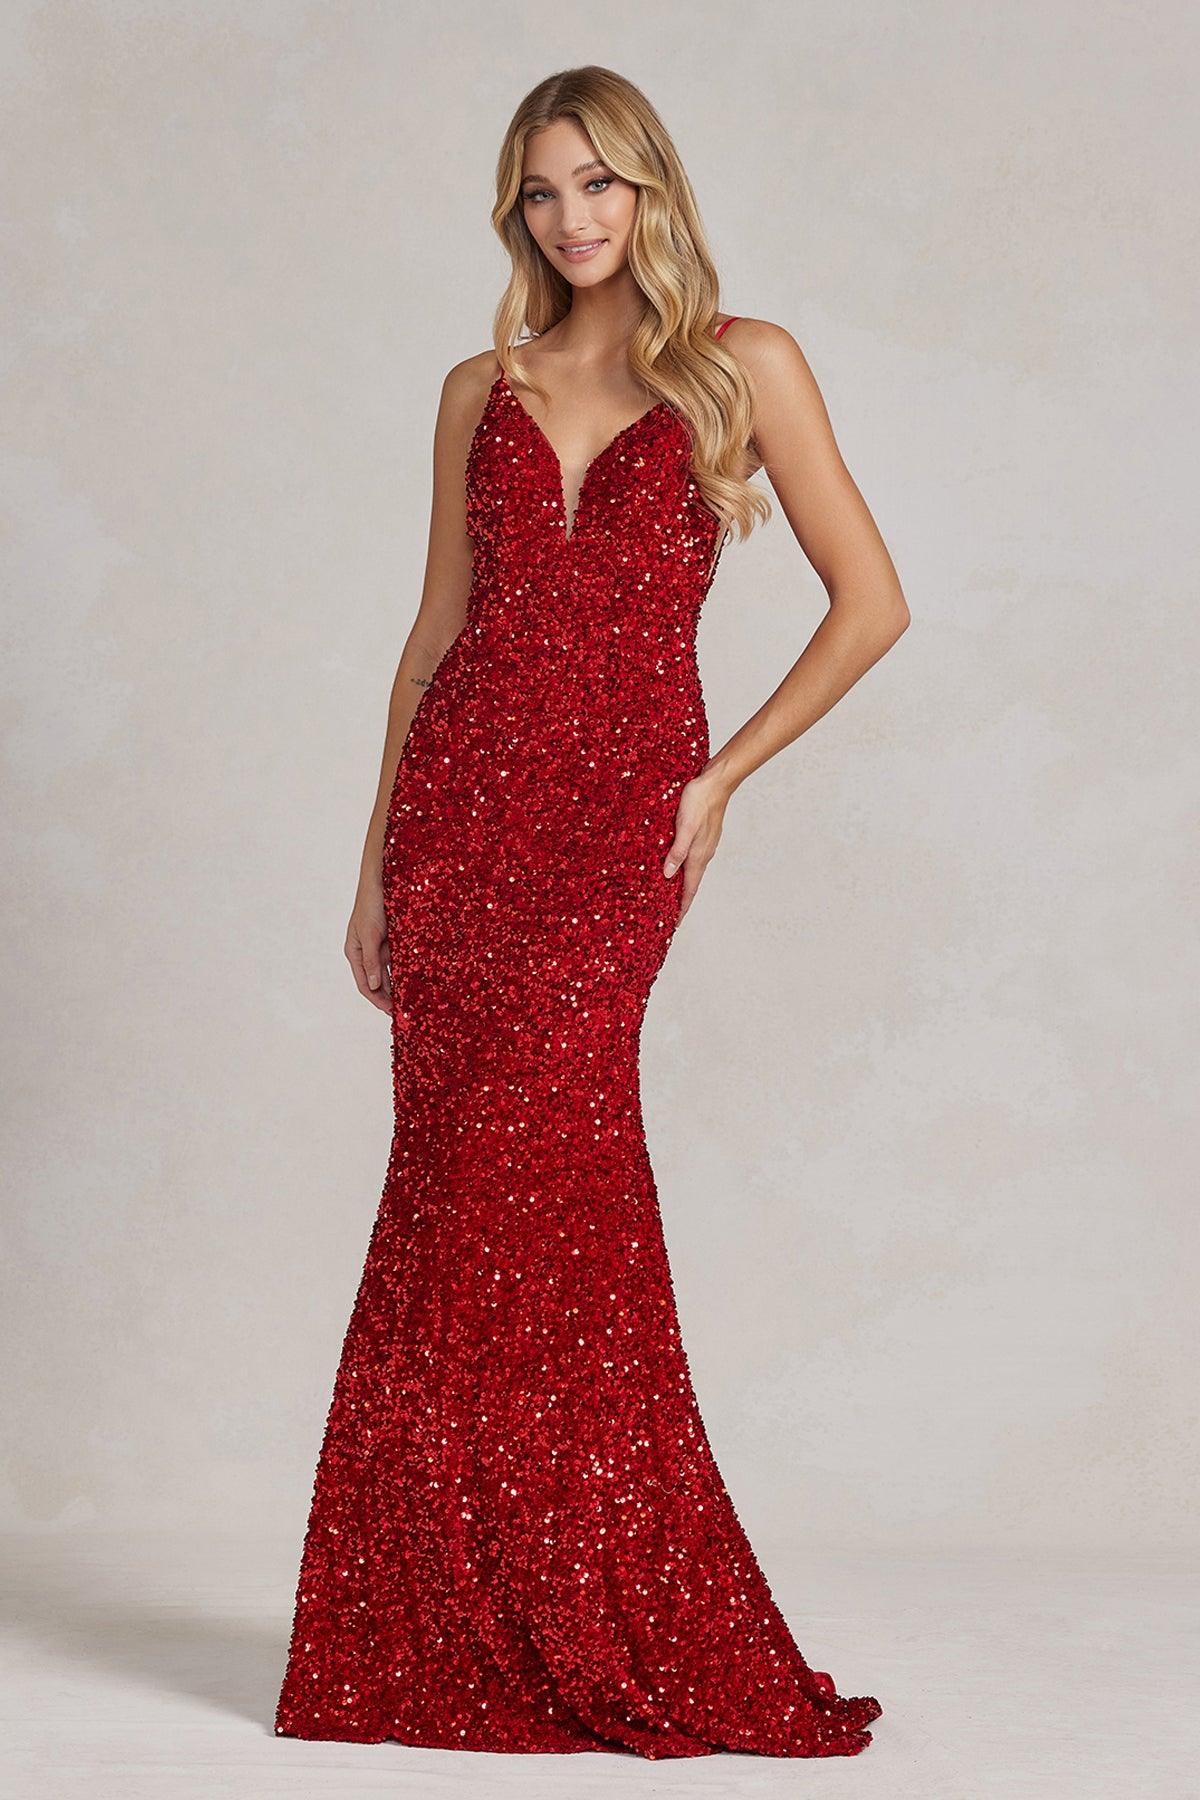 Nox Anabel R1071 Prom Long Formal Fitted Dress | The Dress Outlet